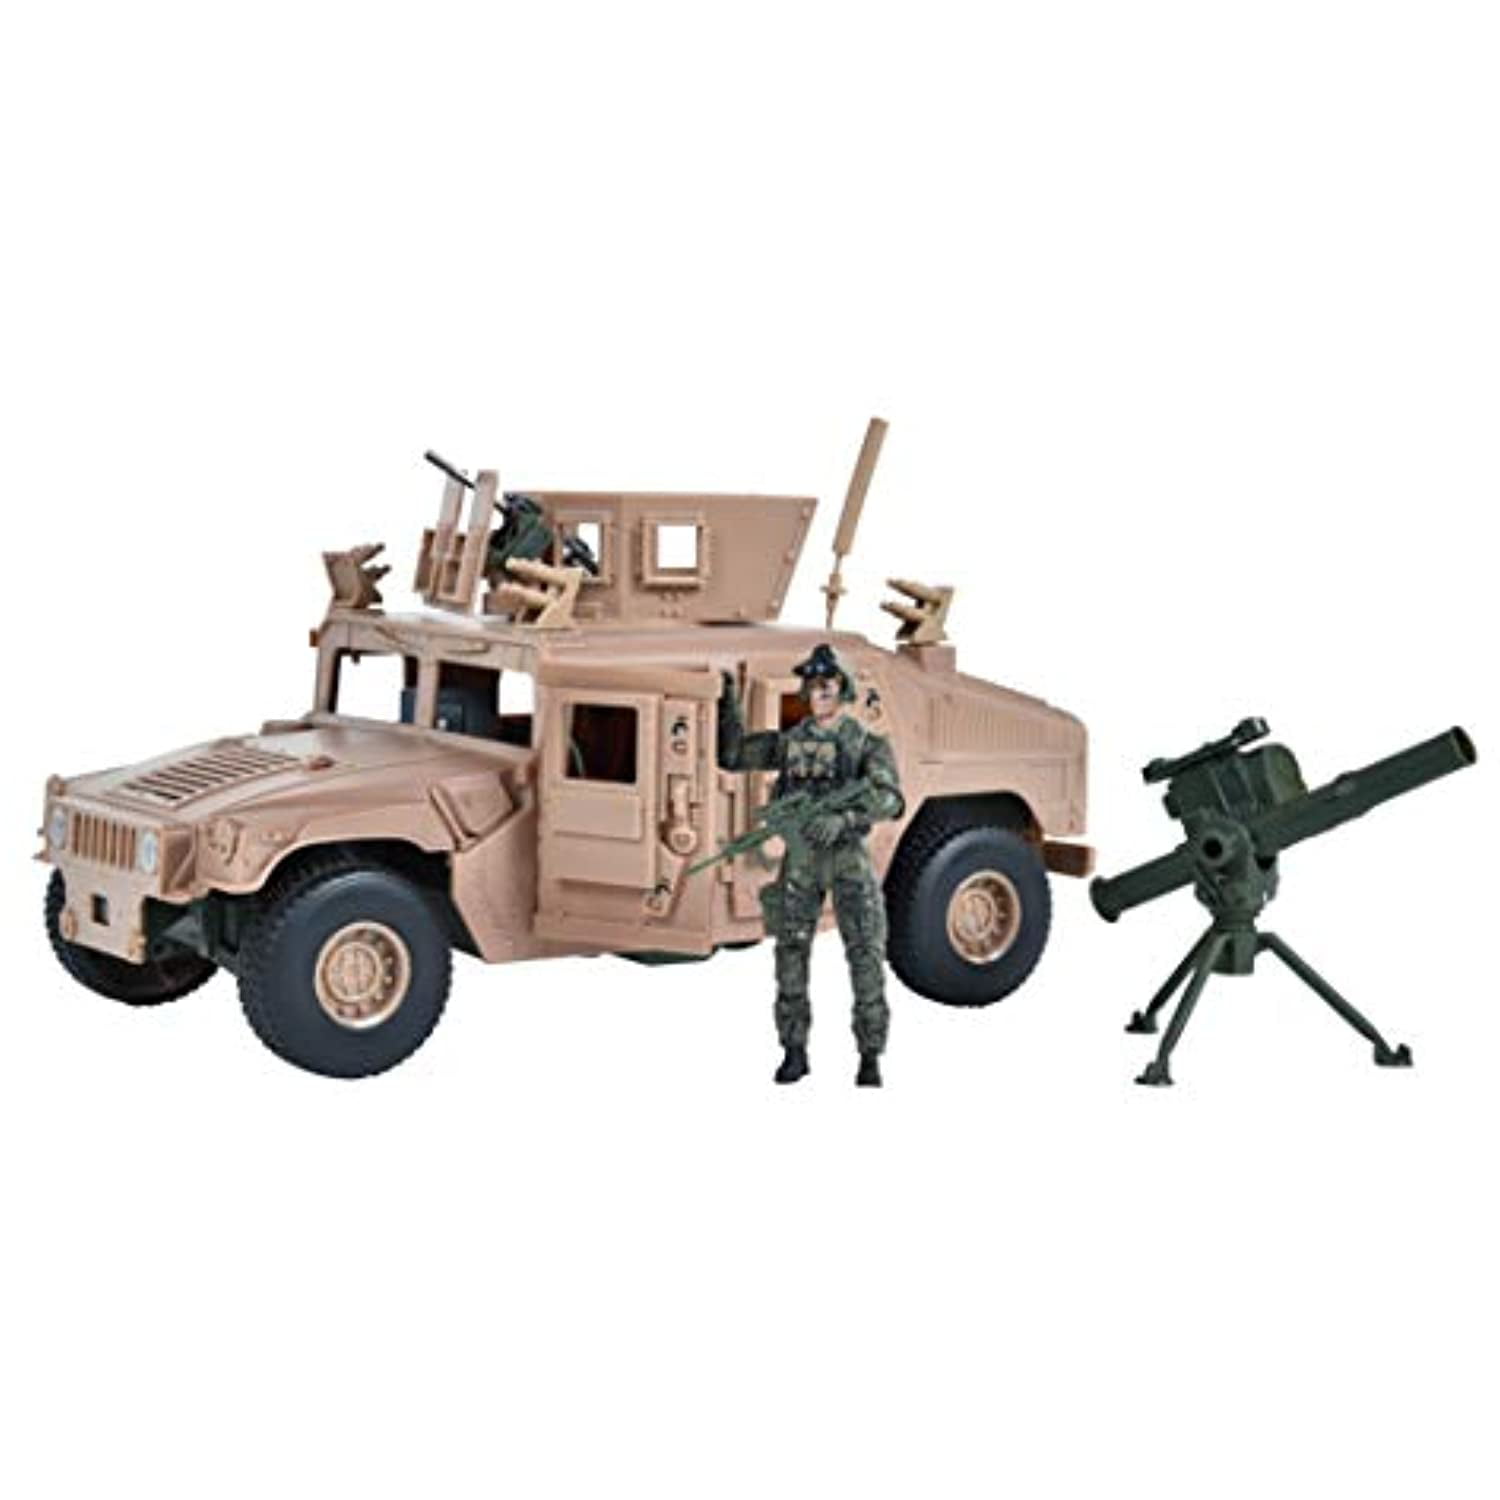 Big Daddy Army Transport Truck Military Toy Truck with Lights and Sound Emergency Quick Release Effect KidsVoiceToys SG_B07GD7KZ87_US